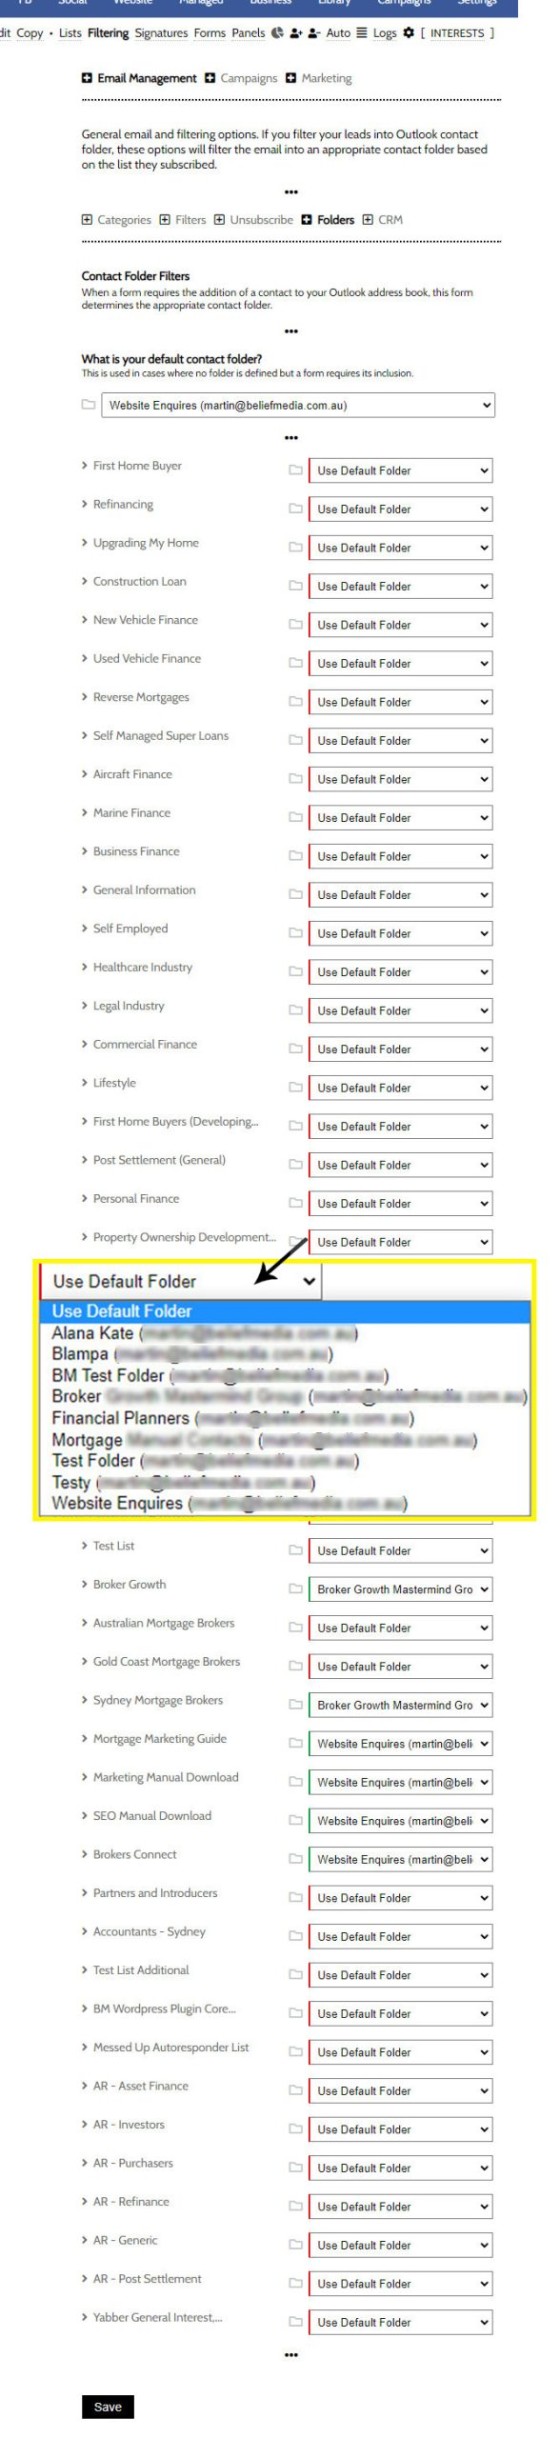 How to Create Form Subscription Contact Folder Filtering